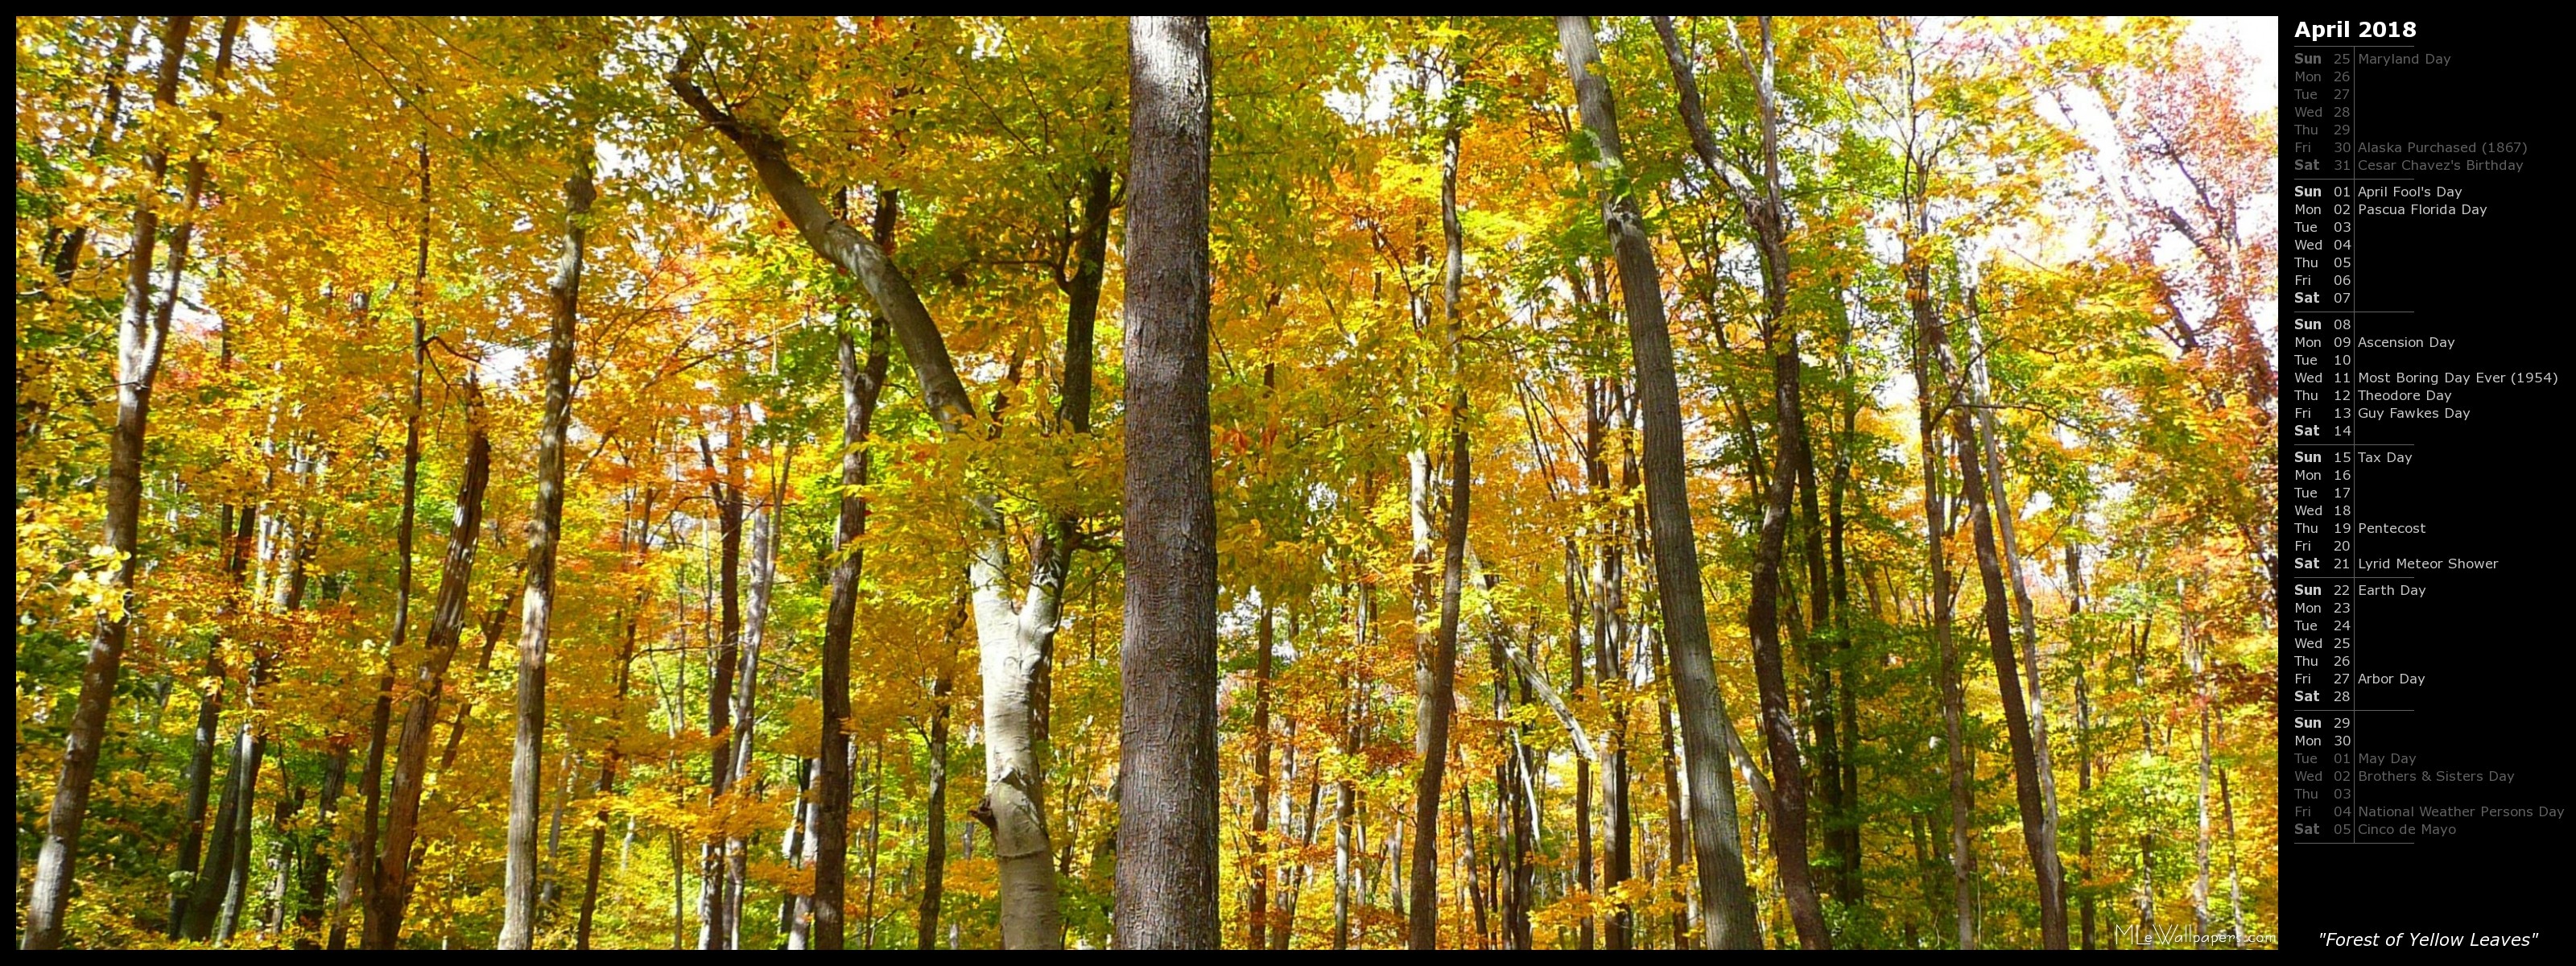 3200x1200 The leaves were perfect in October at the Seven Springs Autumnfest. Here's  a nature wallpaper of a forest filled with bright yellow trees.